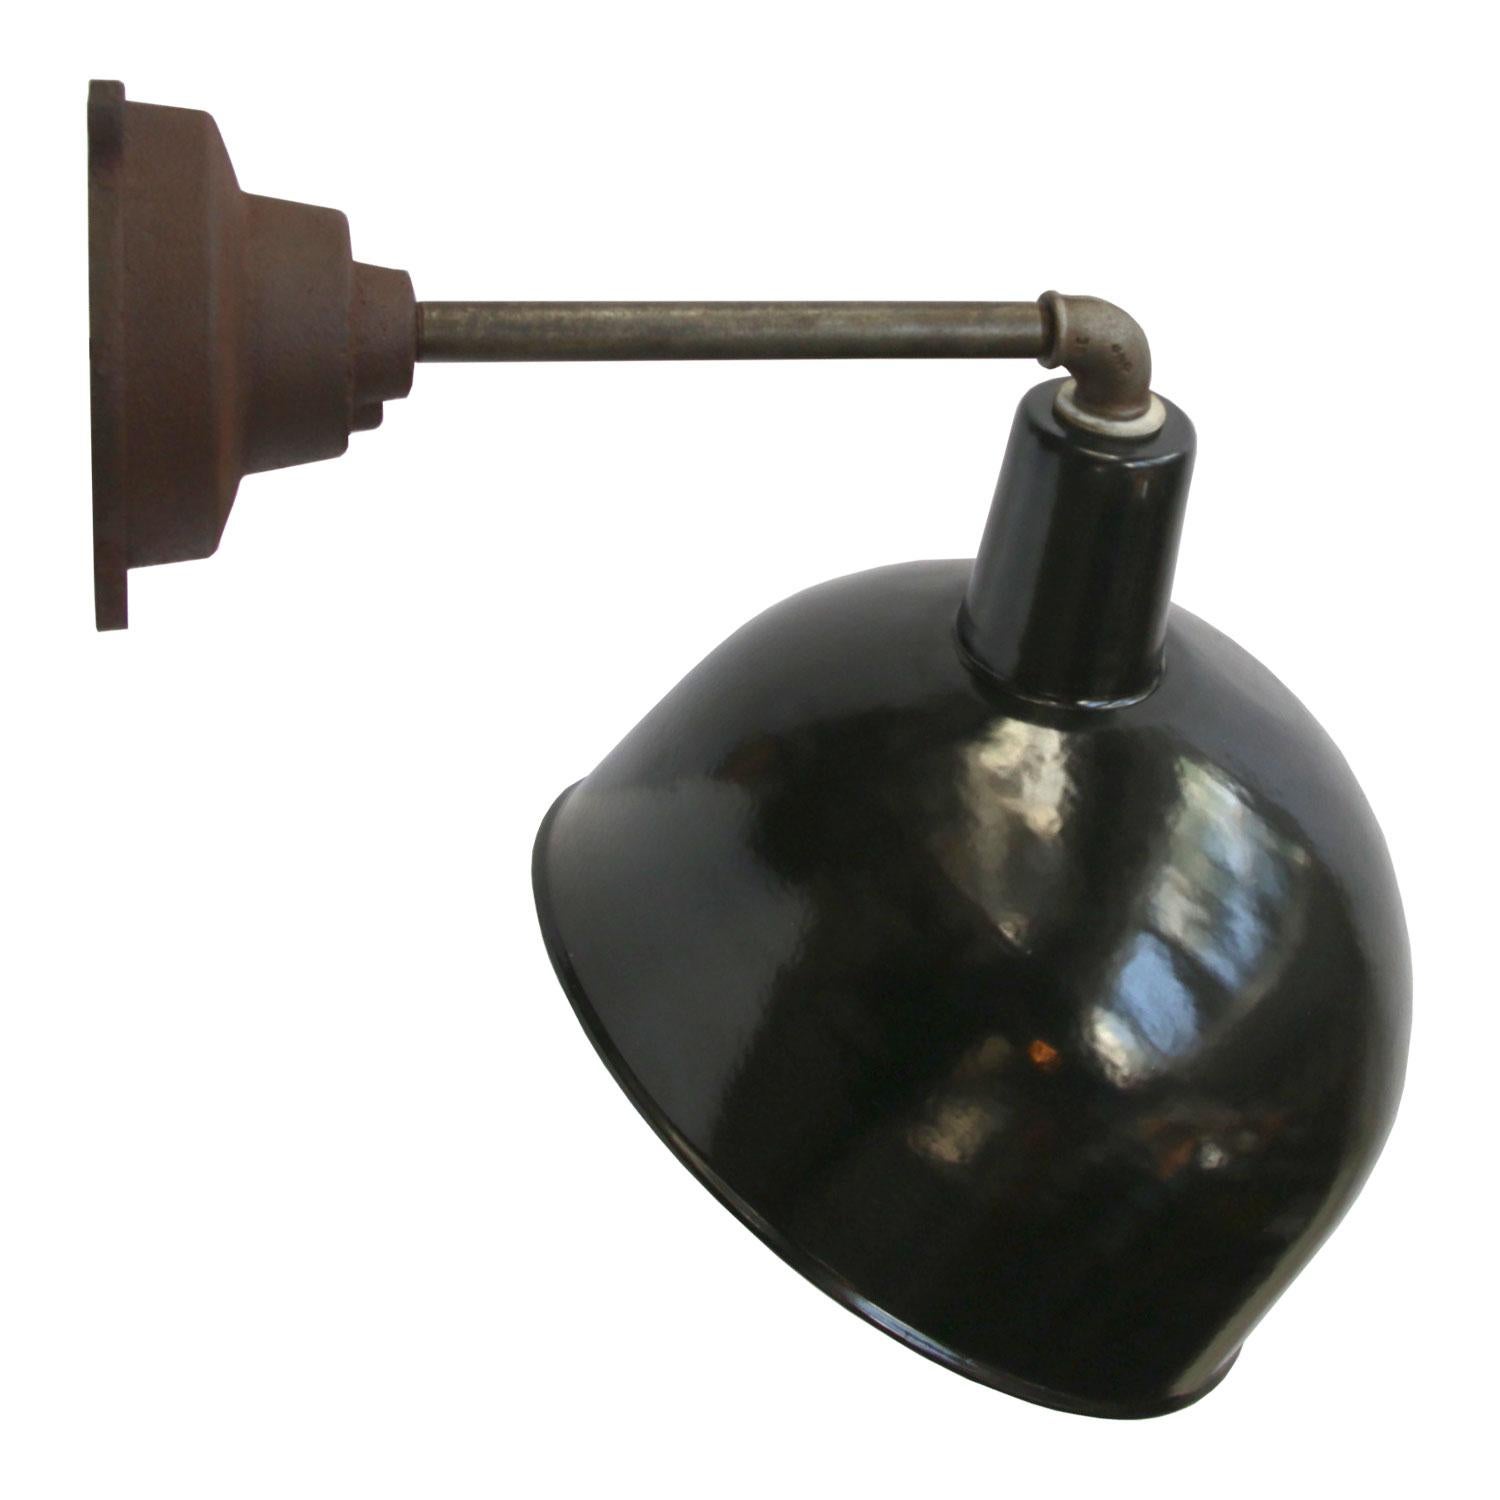 Factory wall light. Black enamel. White interior.
Diameter cast iron wall piece: 12 cm. 3 Holes to secure.

Weight: 3.1 kg / 6.8 lb

Priced per individual item. All lamps have been made suitable by international standards for incandescent light